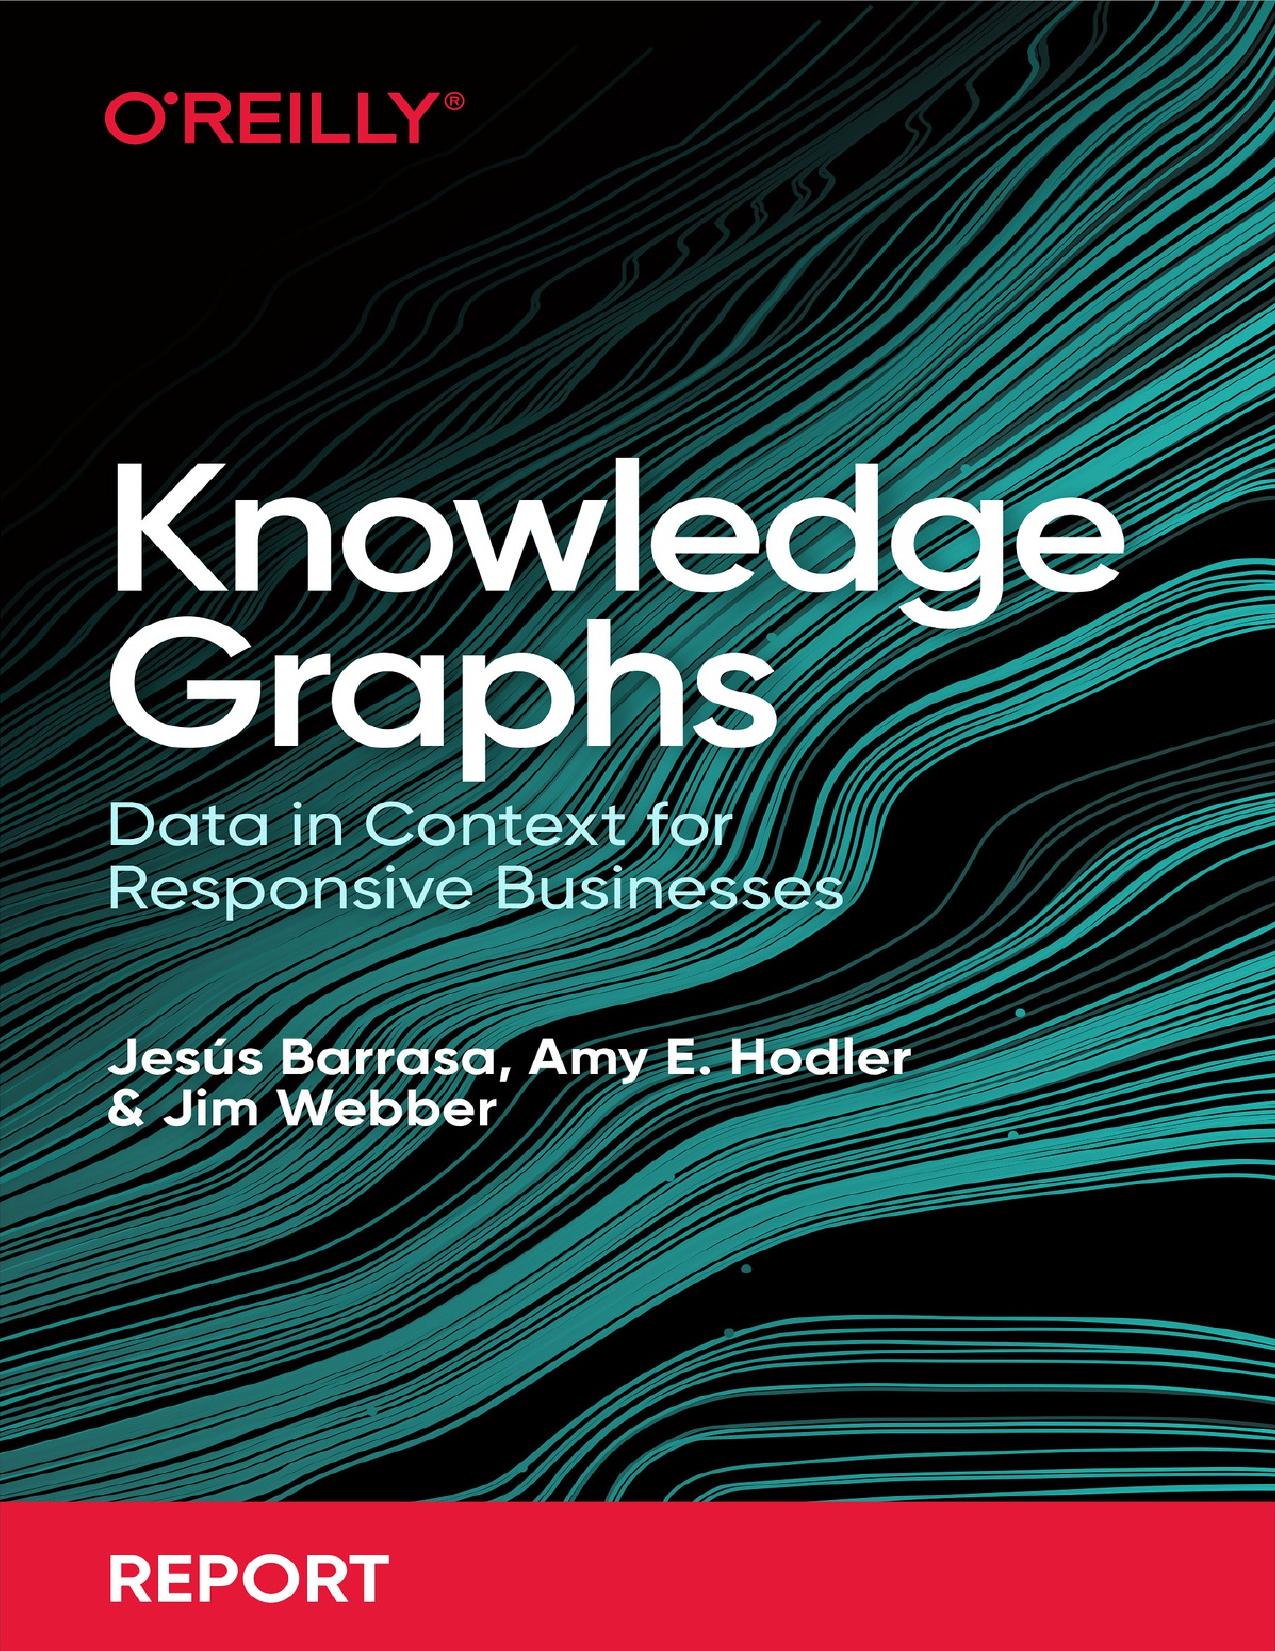 Knowledge Graphs - Data in Context for Responsive Businesses